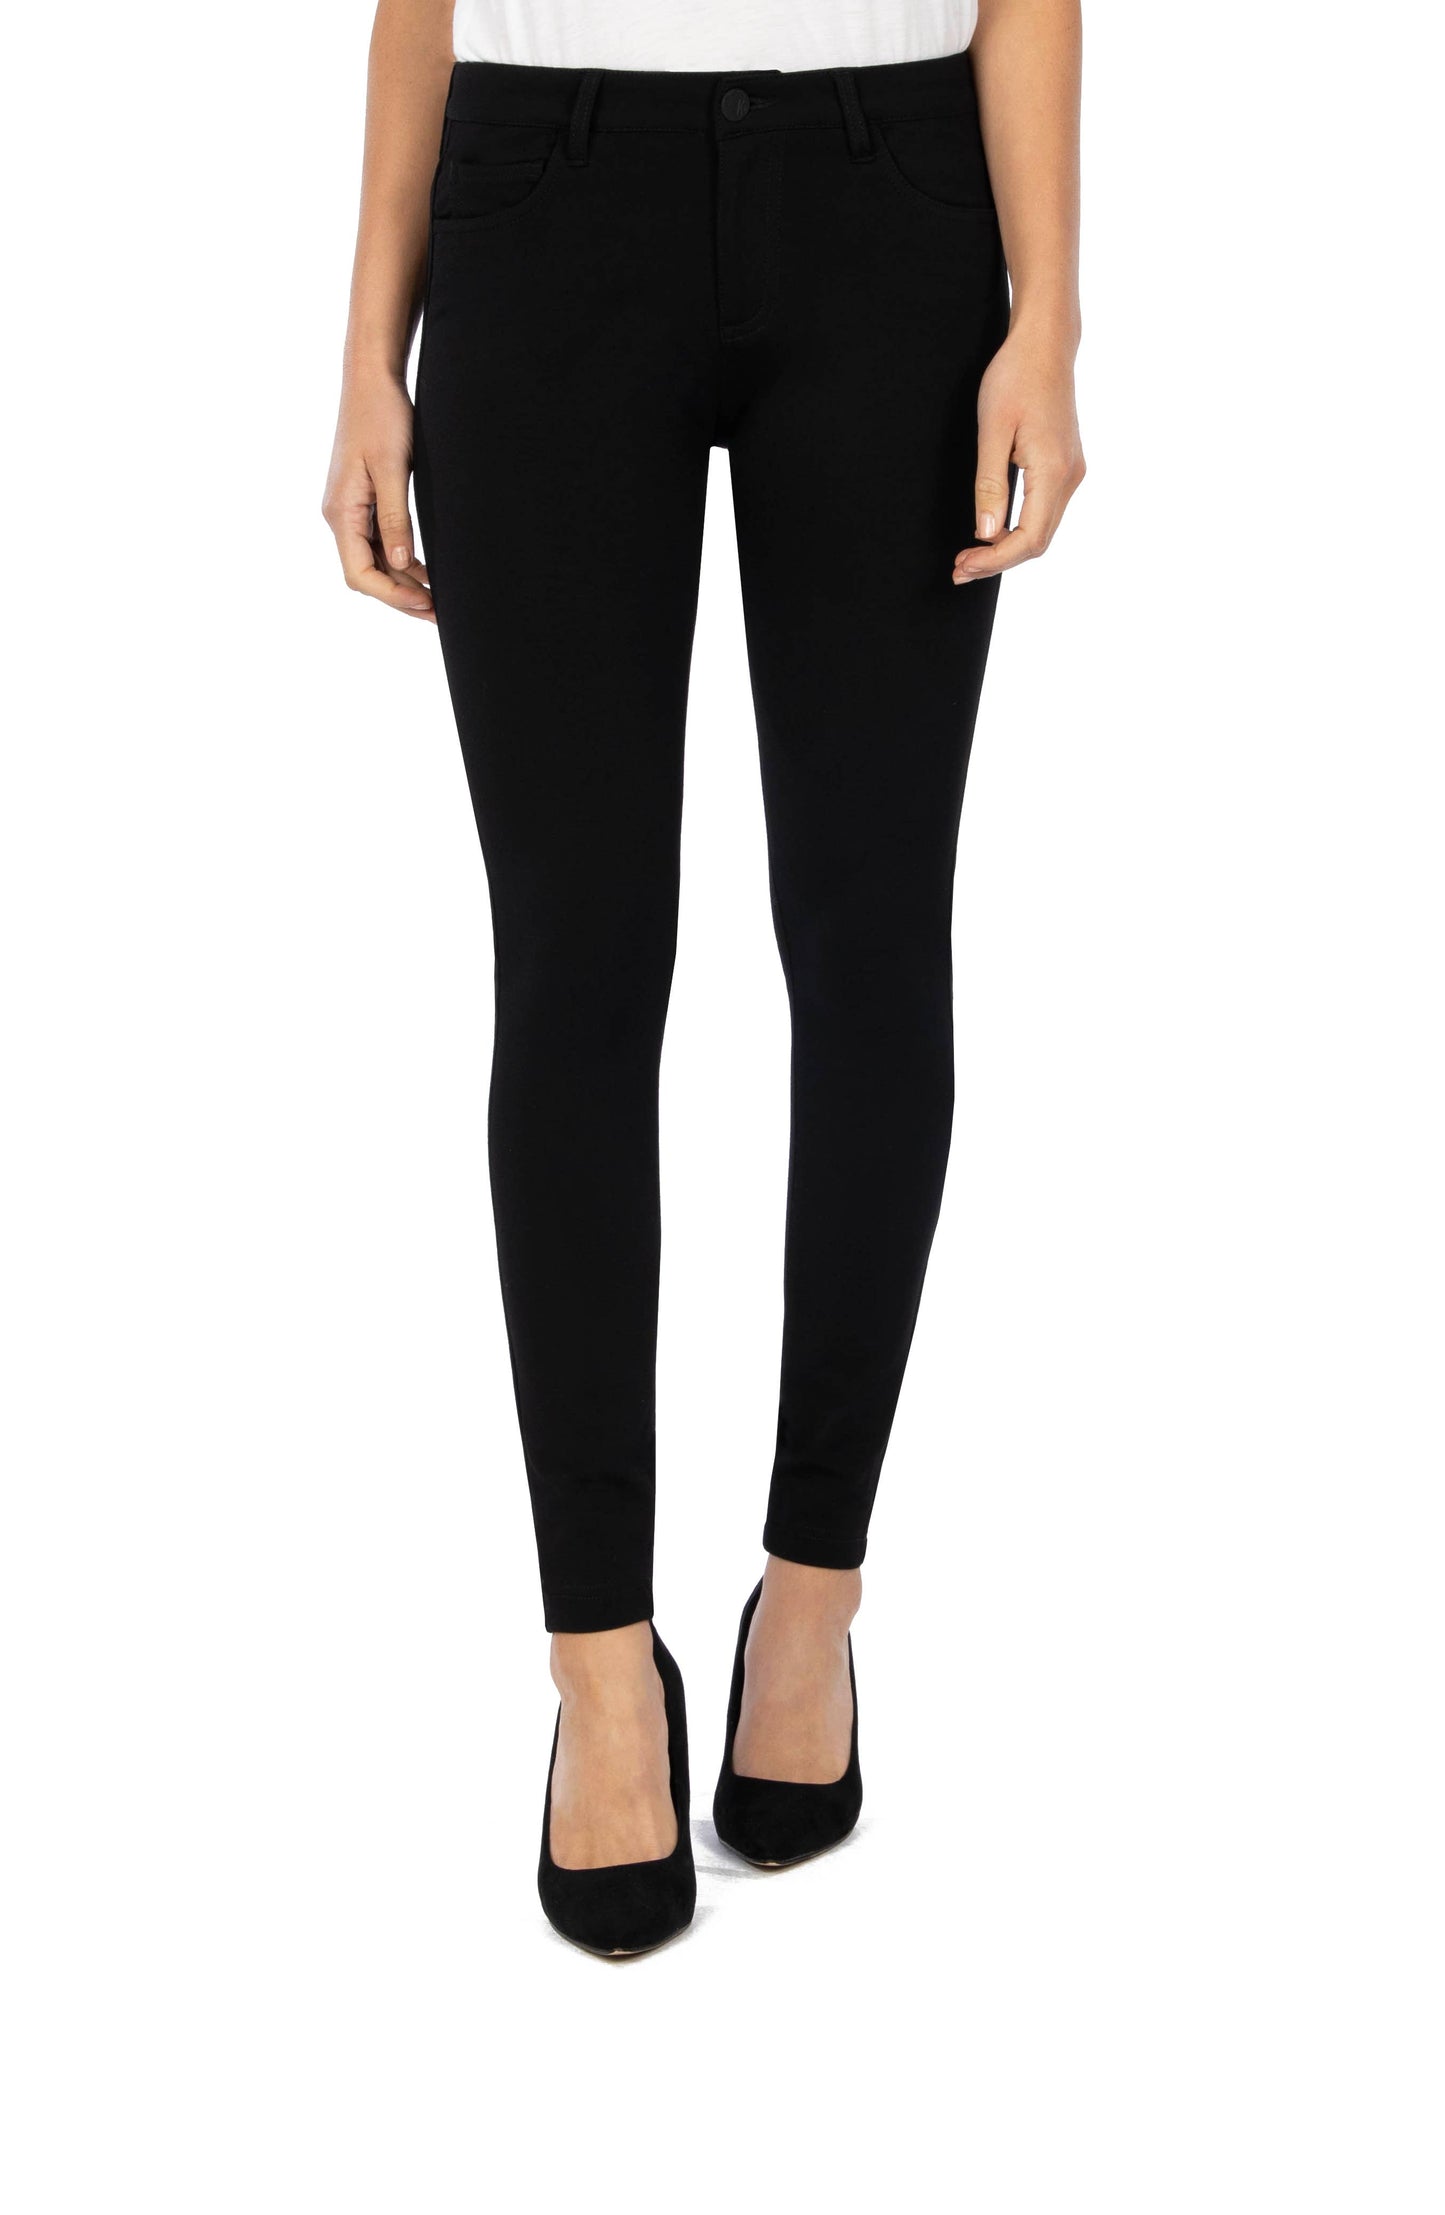 Kut From The Kloth Mia High Rise Jet Black Fab Ab Toothpick Skinny Jeans